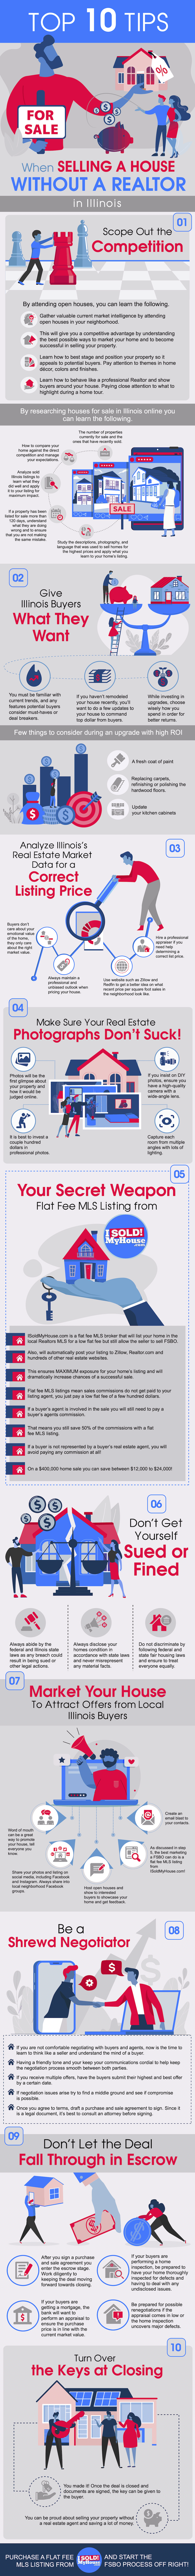 infographic of the 10 steps to sell a house in illinois without an agent